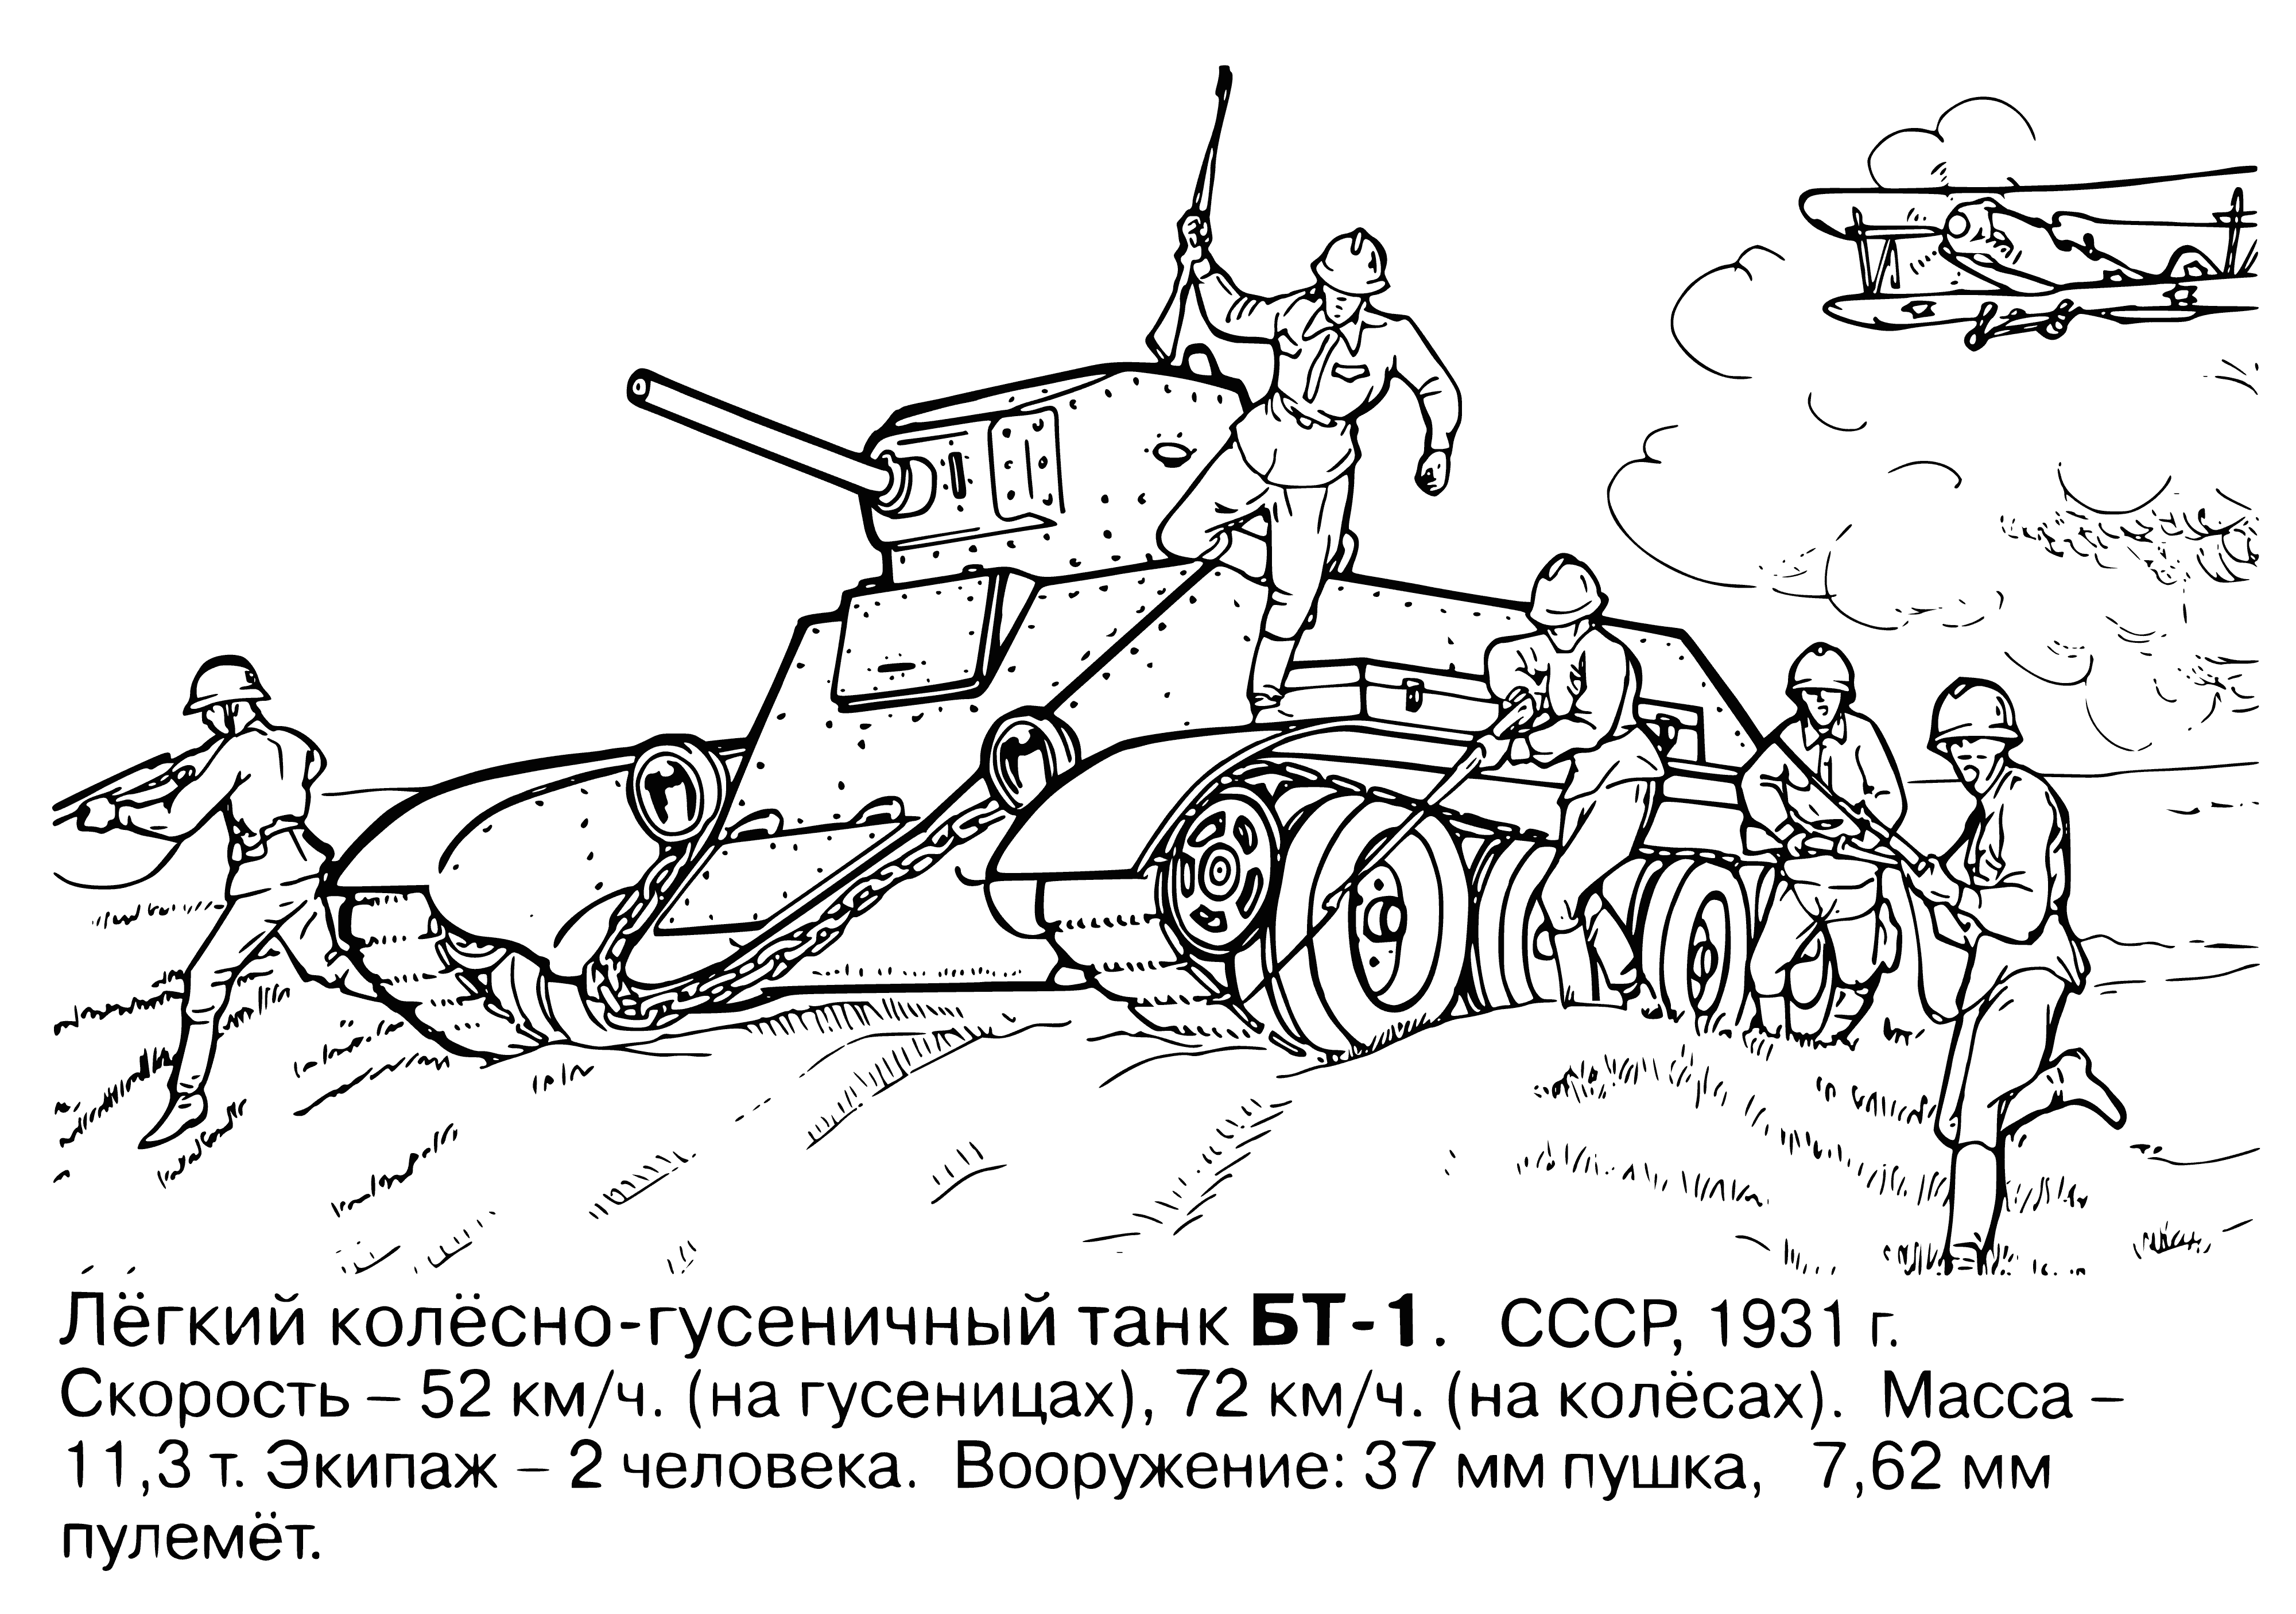 coloring page: Five tanks in a line - small ones are white, blue, green, & red; large one is yellow.